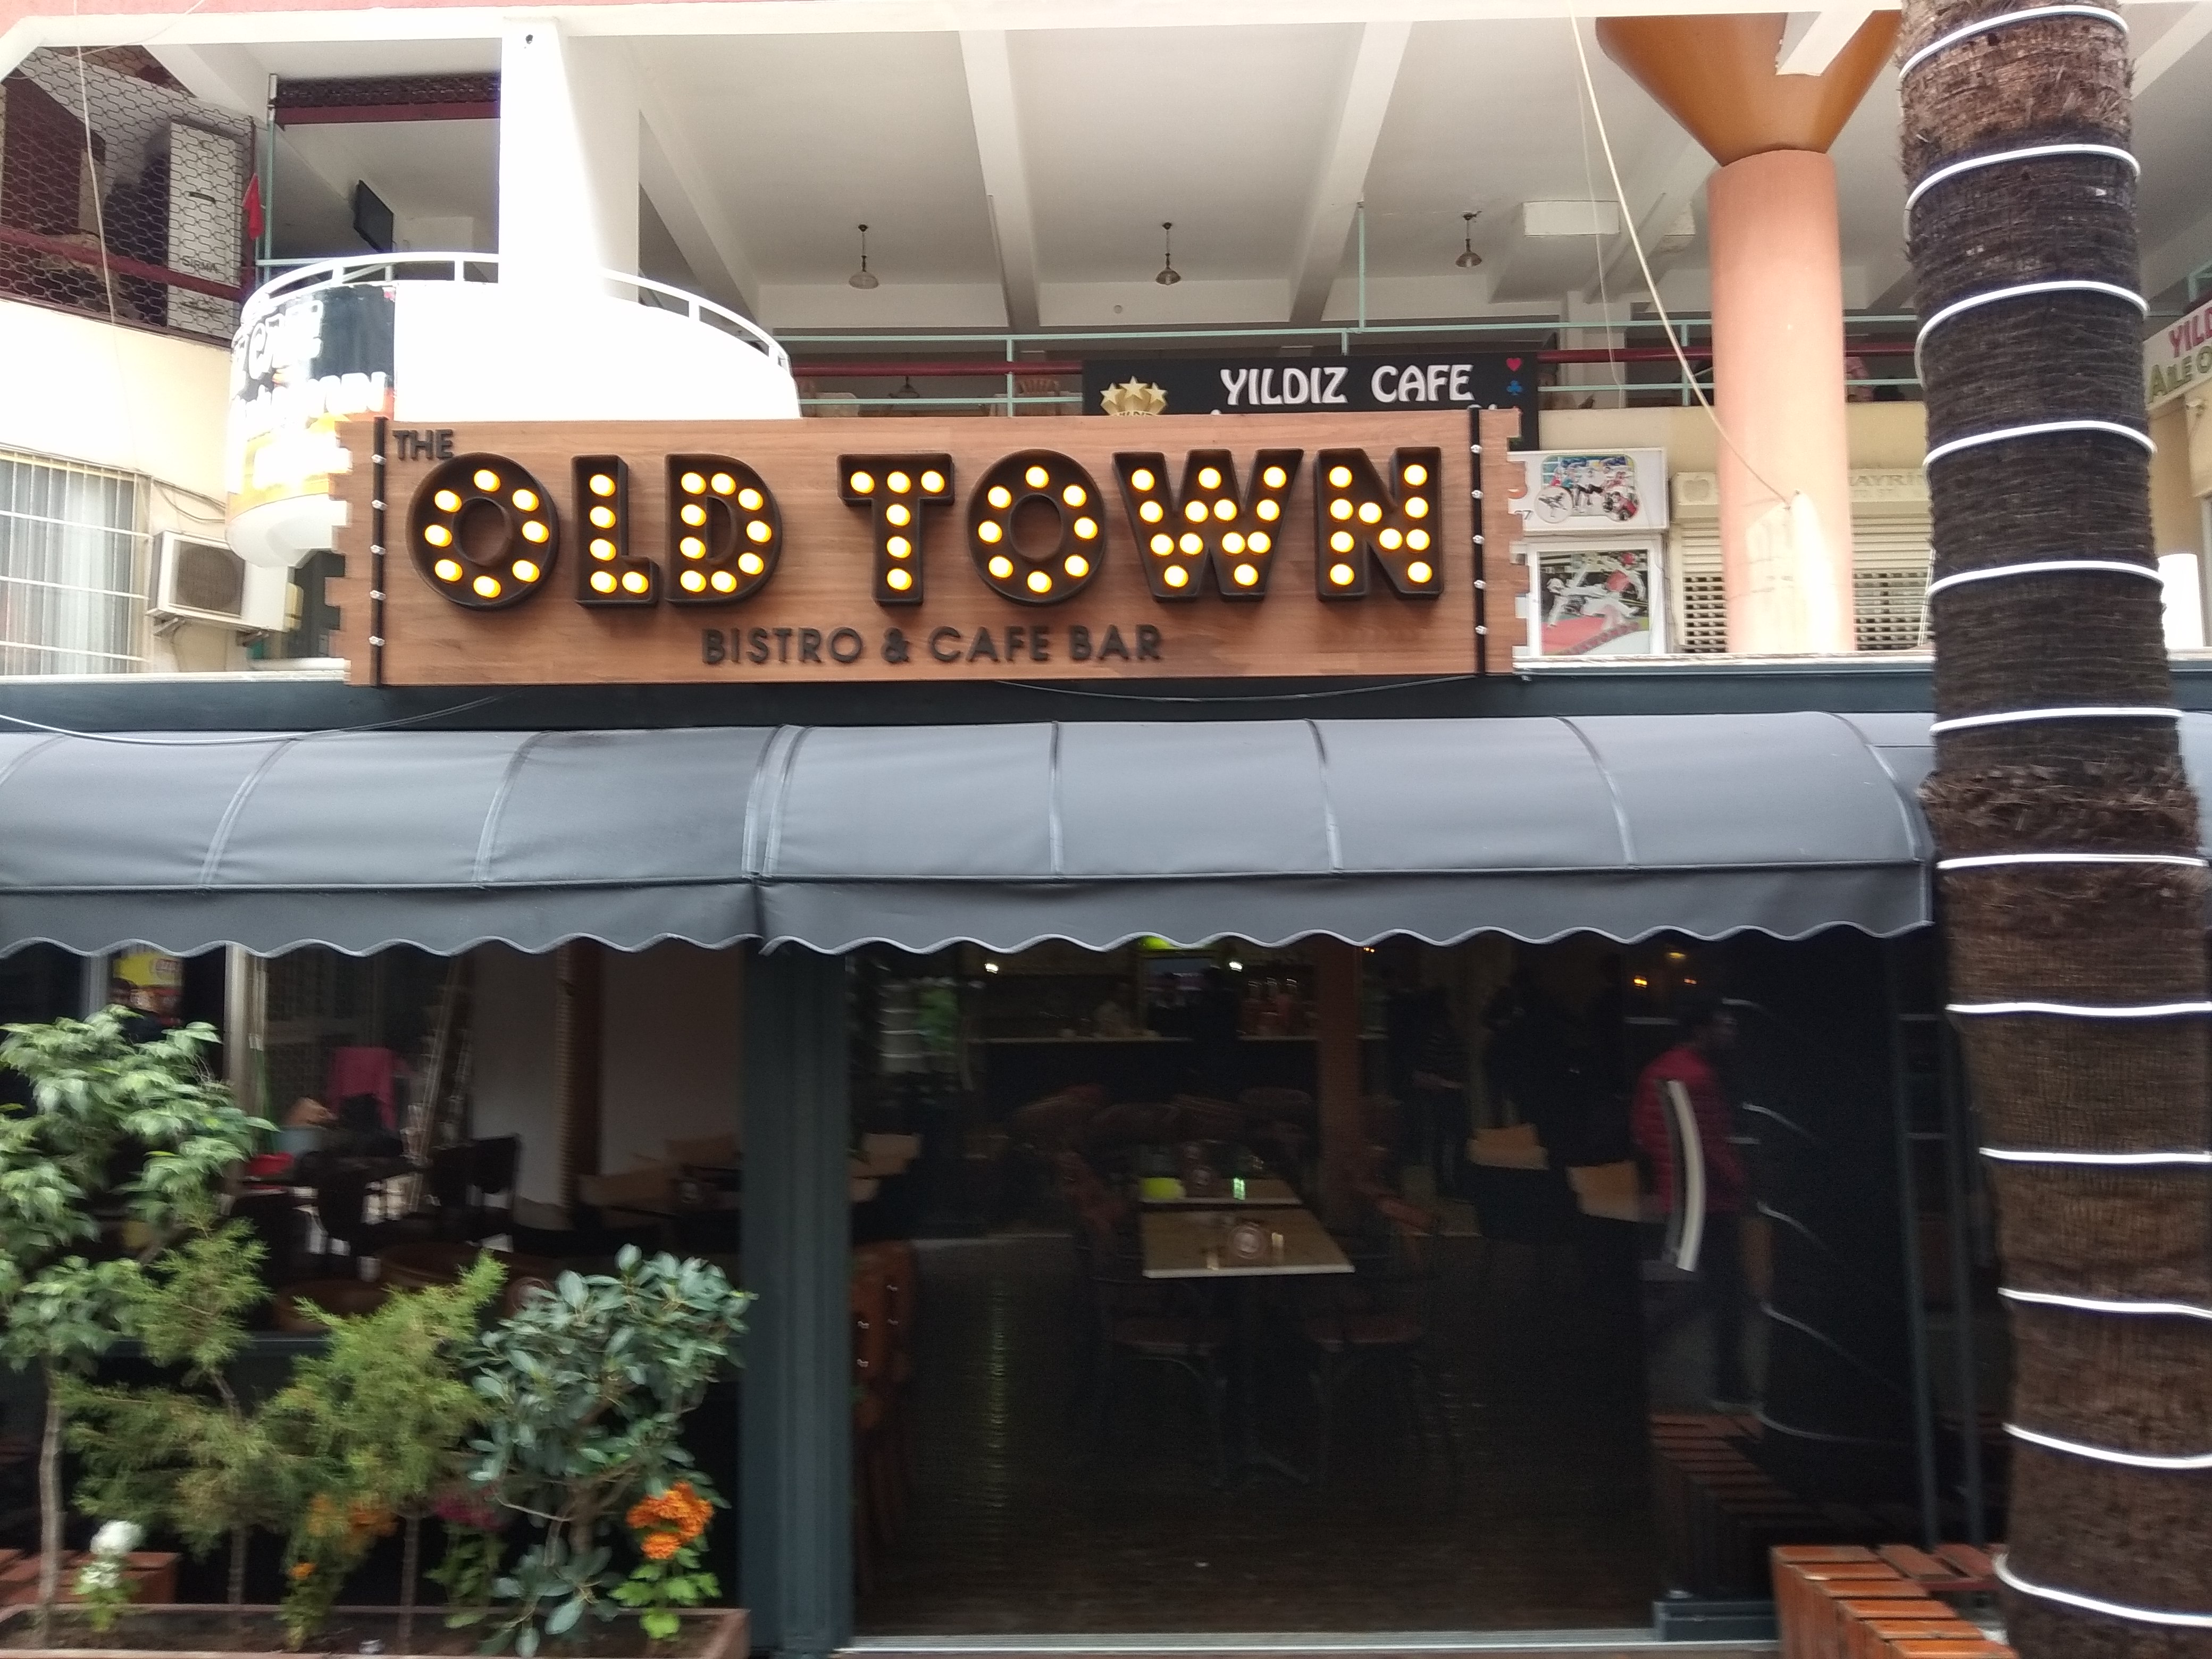 The Old Town Bistro Cafe & Bar